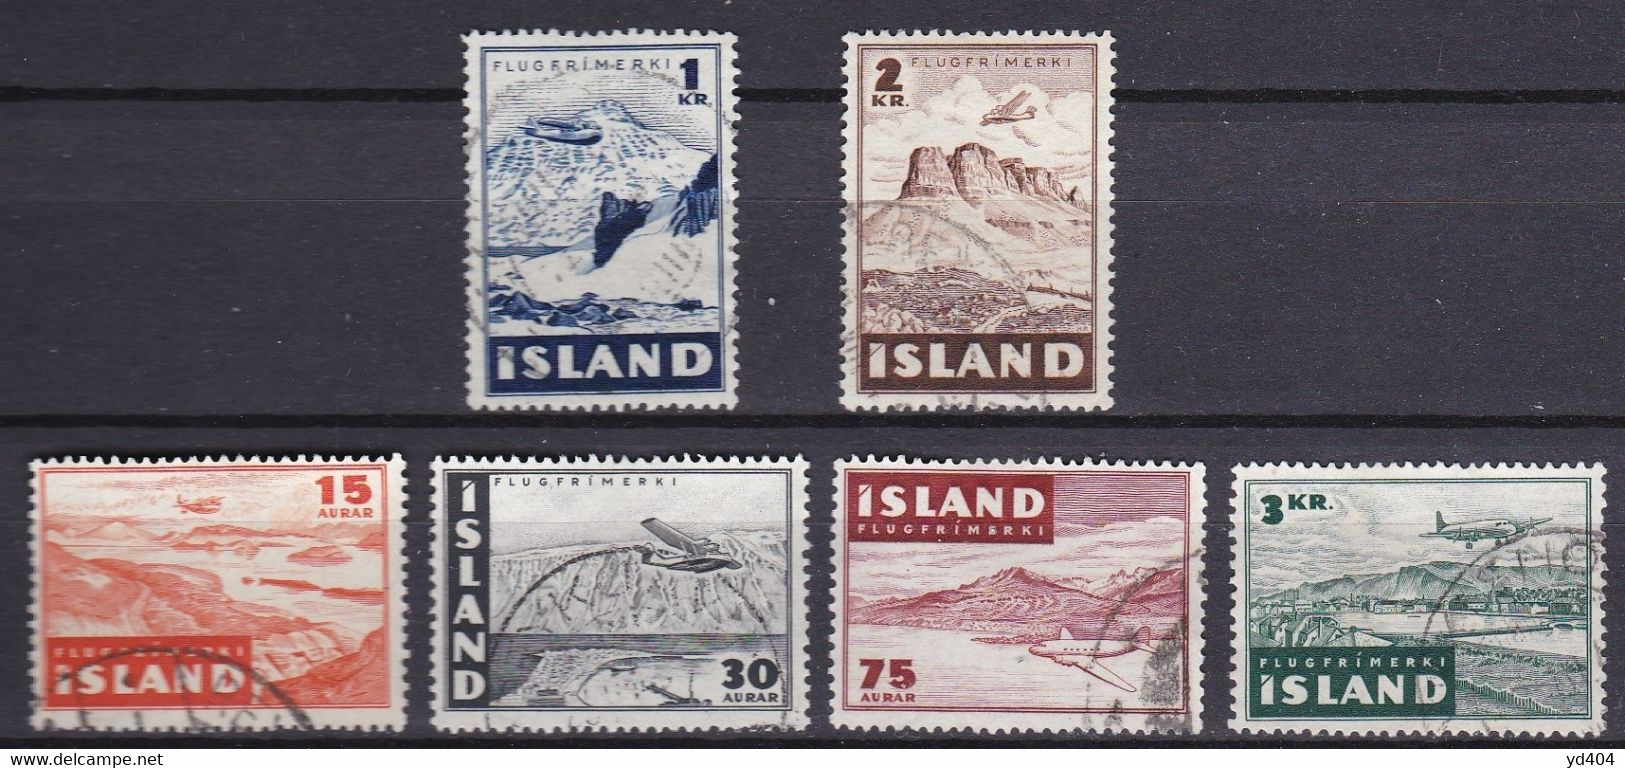 IS330 – ISLANDE – ICELAND – 1947 – PLANE OVER GLACIERS – Y&T # 21/6 USED 10 € - Airmail